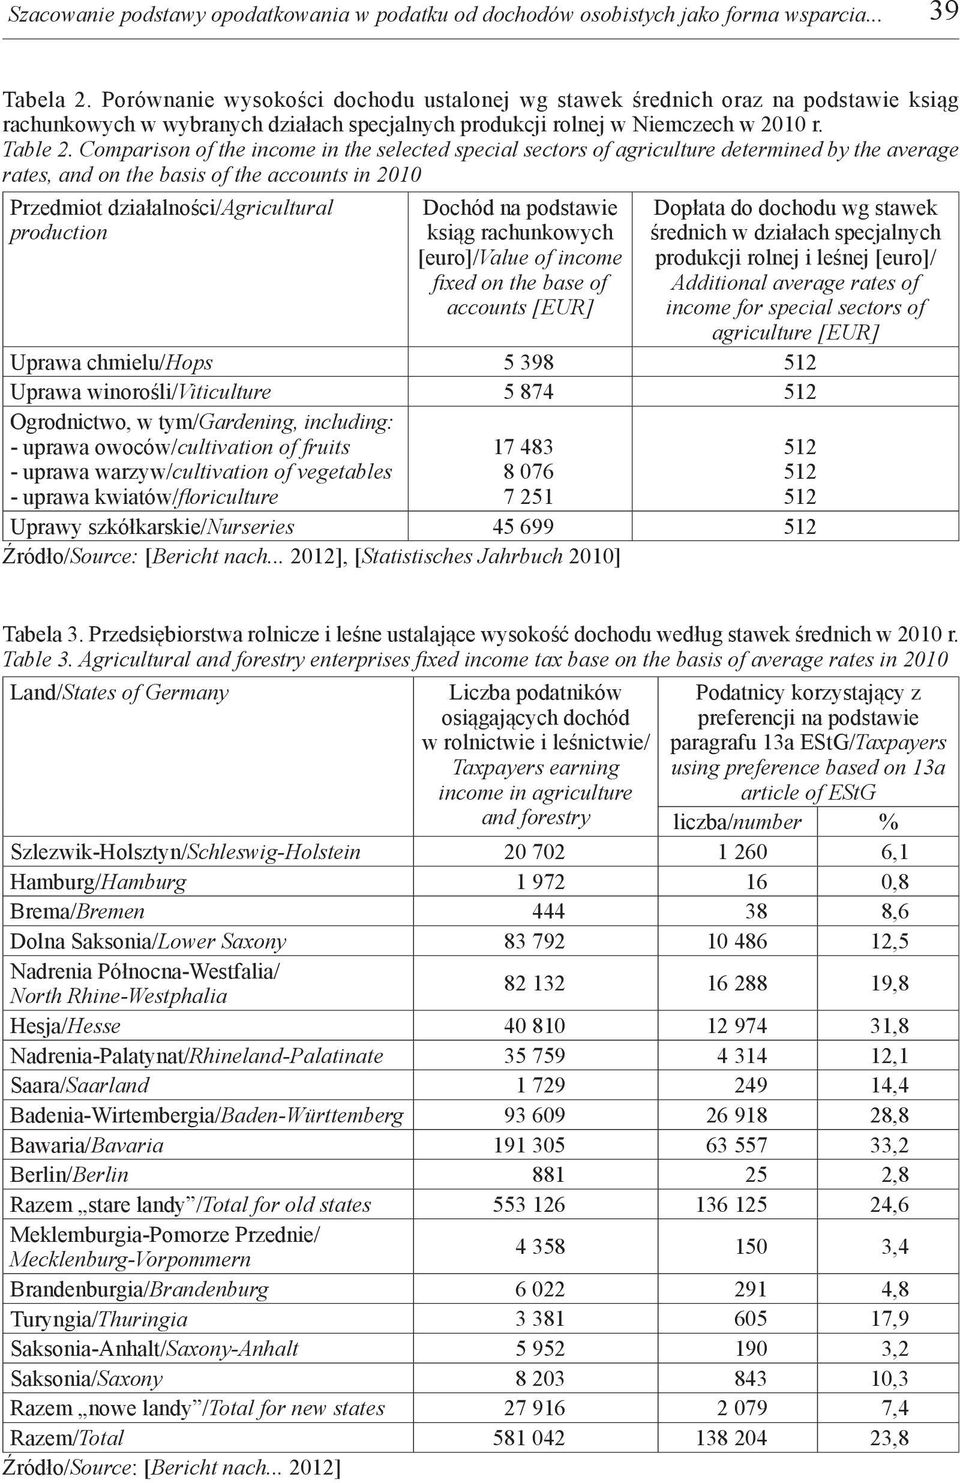 Comparison of the income in the selected special sectors of agriculture determined by the average rates, and on the basis of the accounts in 2010 Przedmiot działalności/agricultural production Dochód